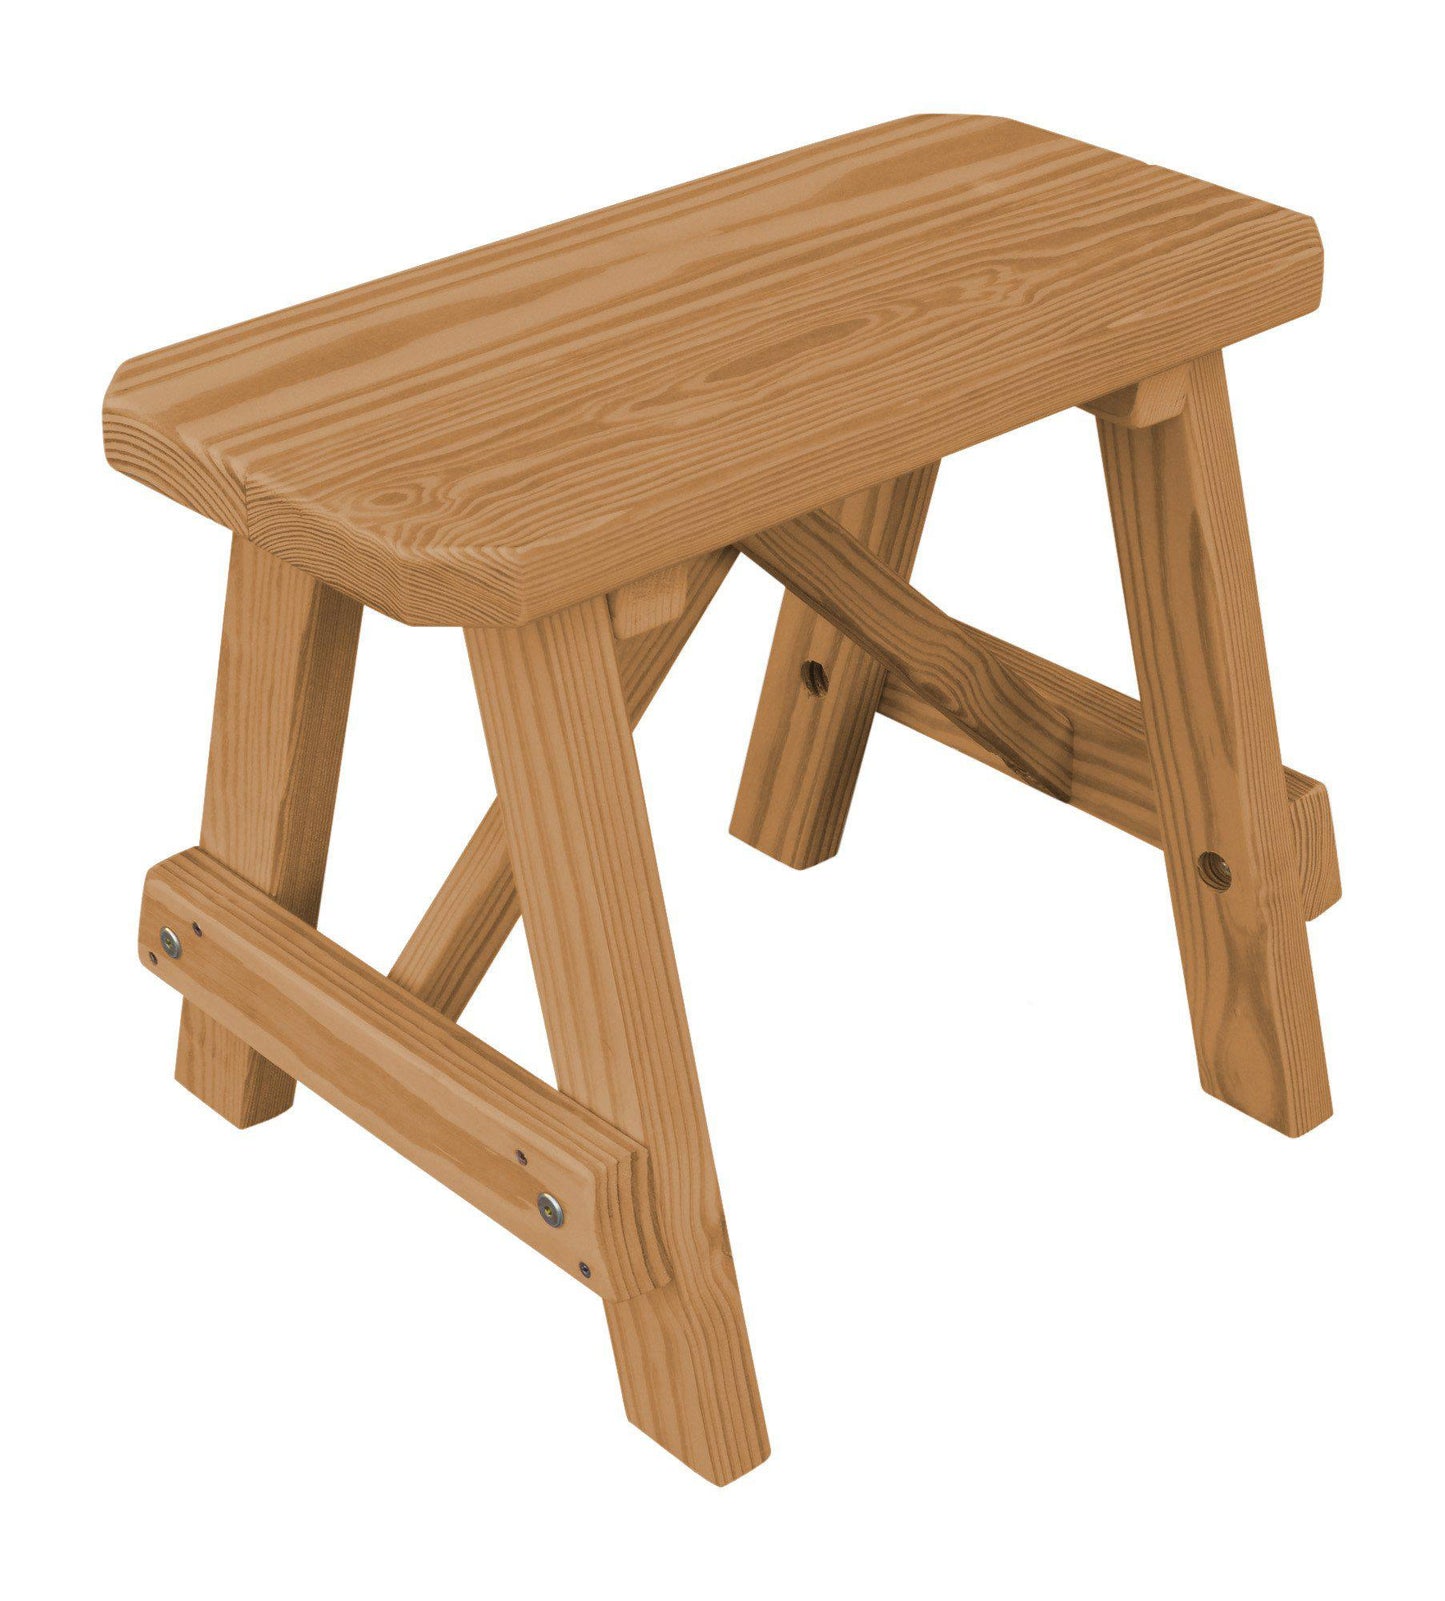 A&L Furniture Co. Yellow Pine 23" Traditional Bench Only - LEAD TIME TO SHIP 10 BUSINESS DAYS